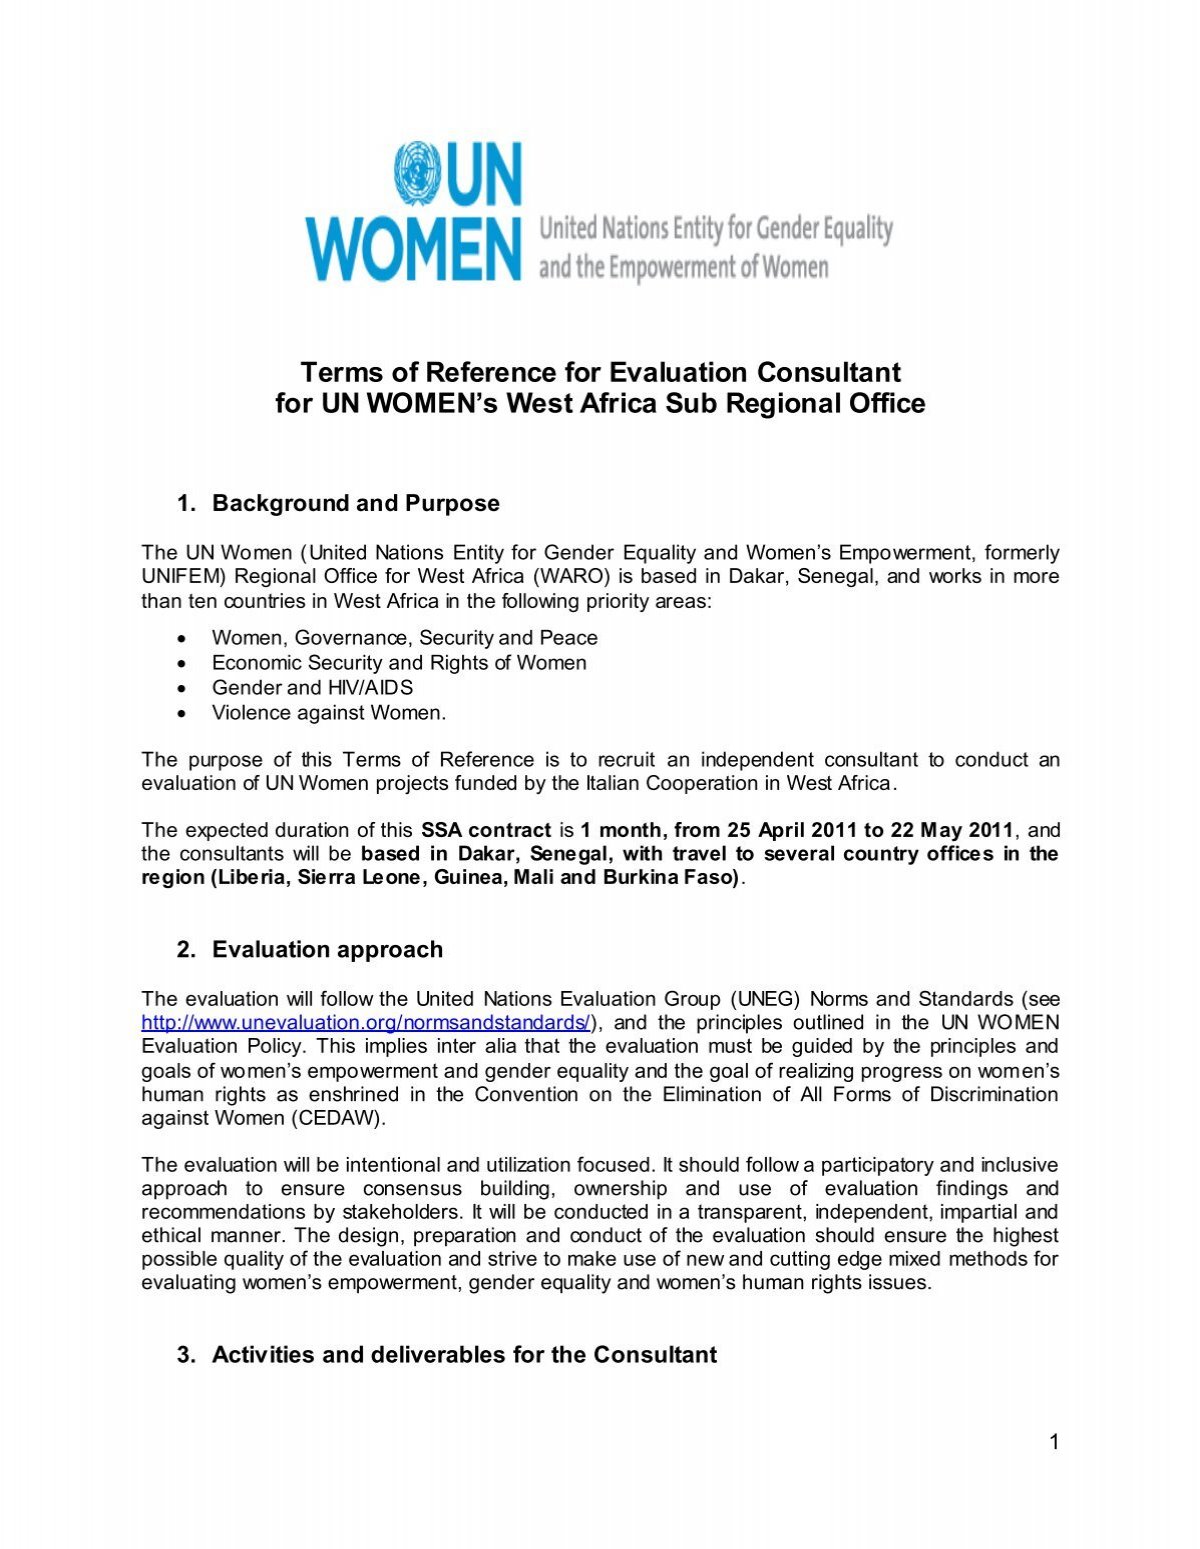 The United Nations Entity for Gender Equality and the Empowerment